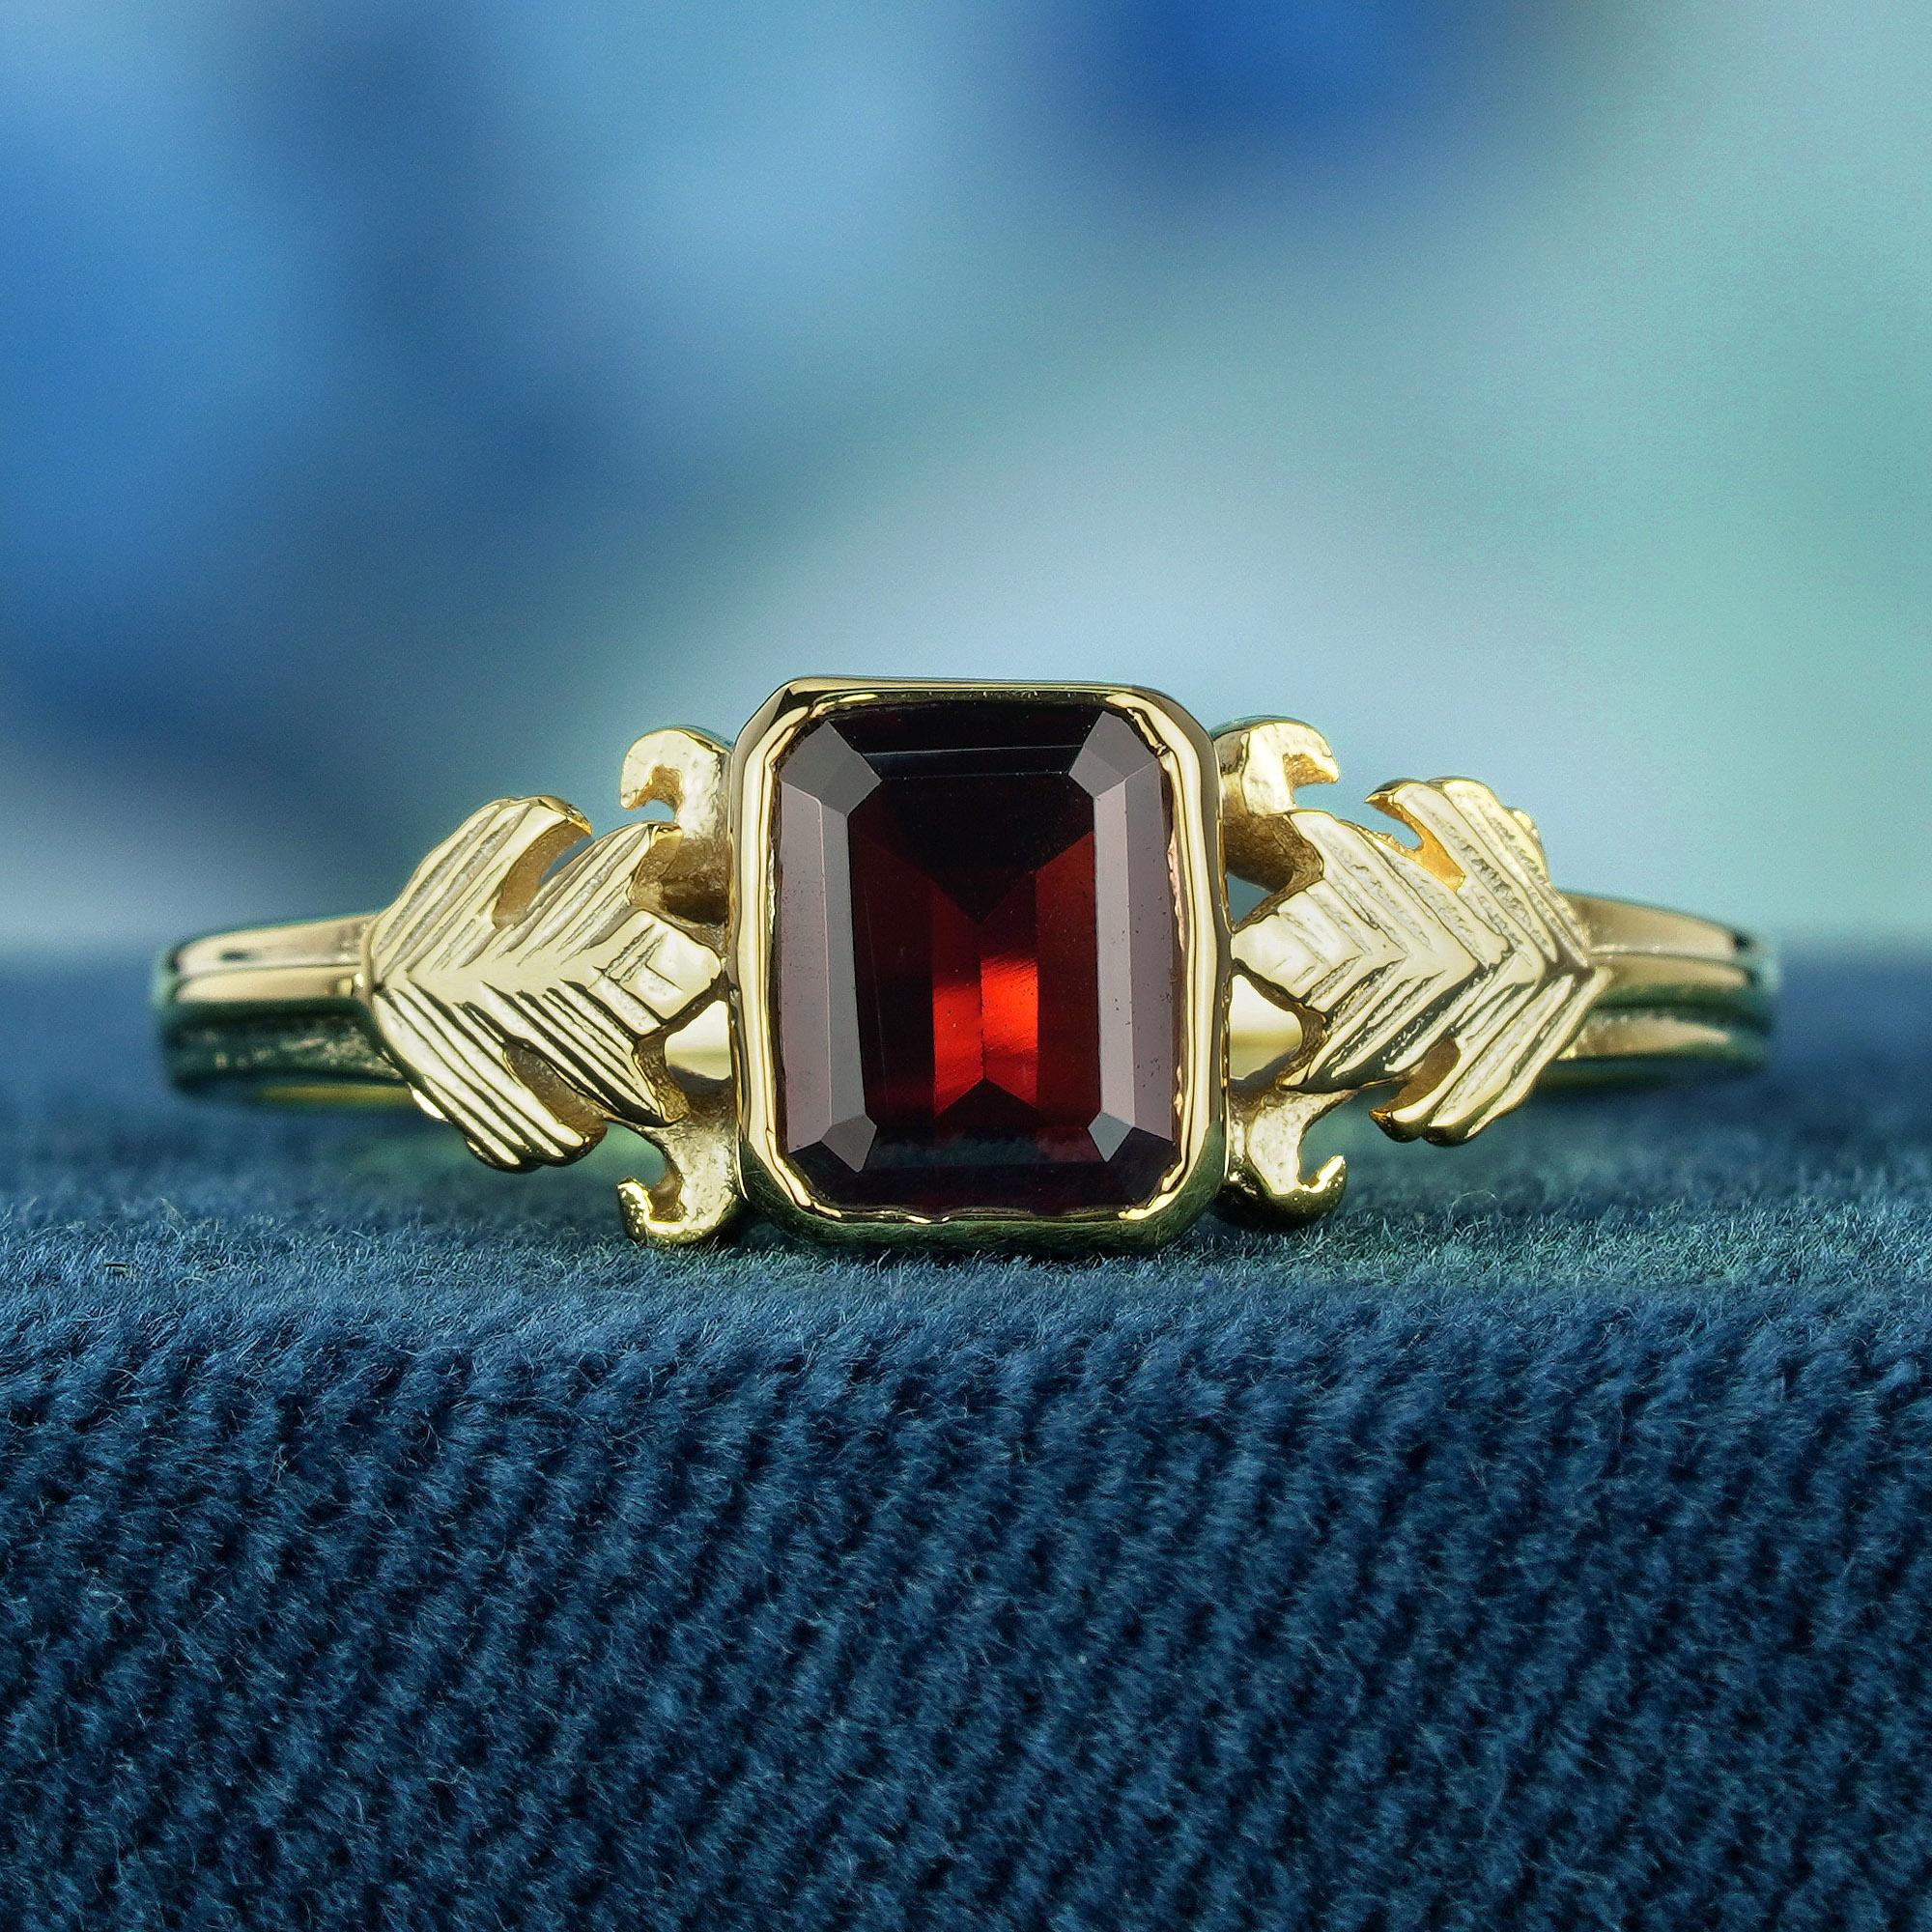 Indulge in the timeless allure of this vintage-inspired ring, a testament to refined elegance. Delicately crafted and embellished with a deep red, emerald-cut garnet stone, nestled within a radiant yellow gold band that gleams with luxurious allure.